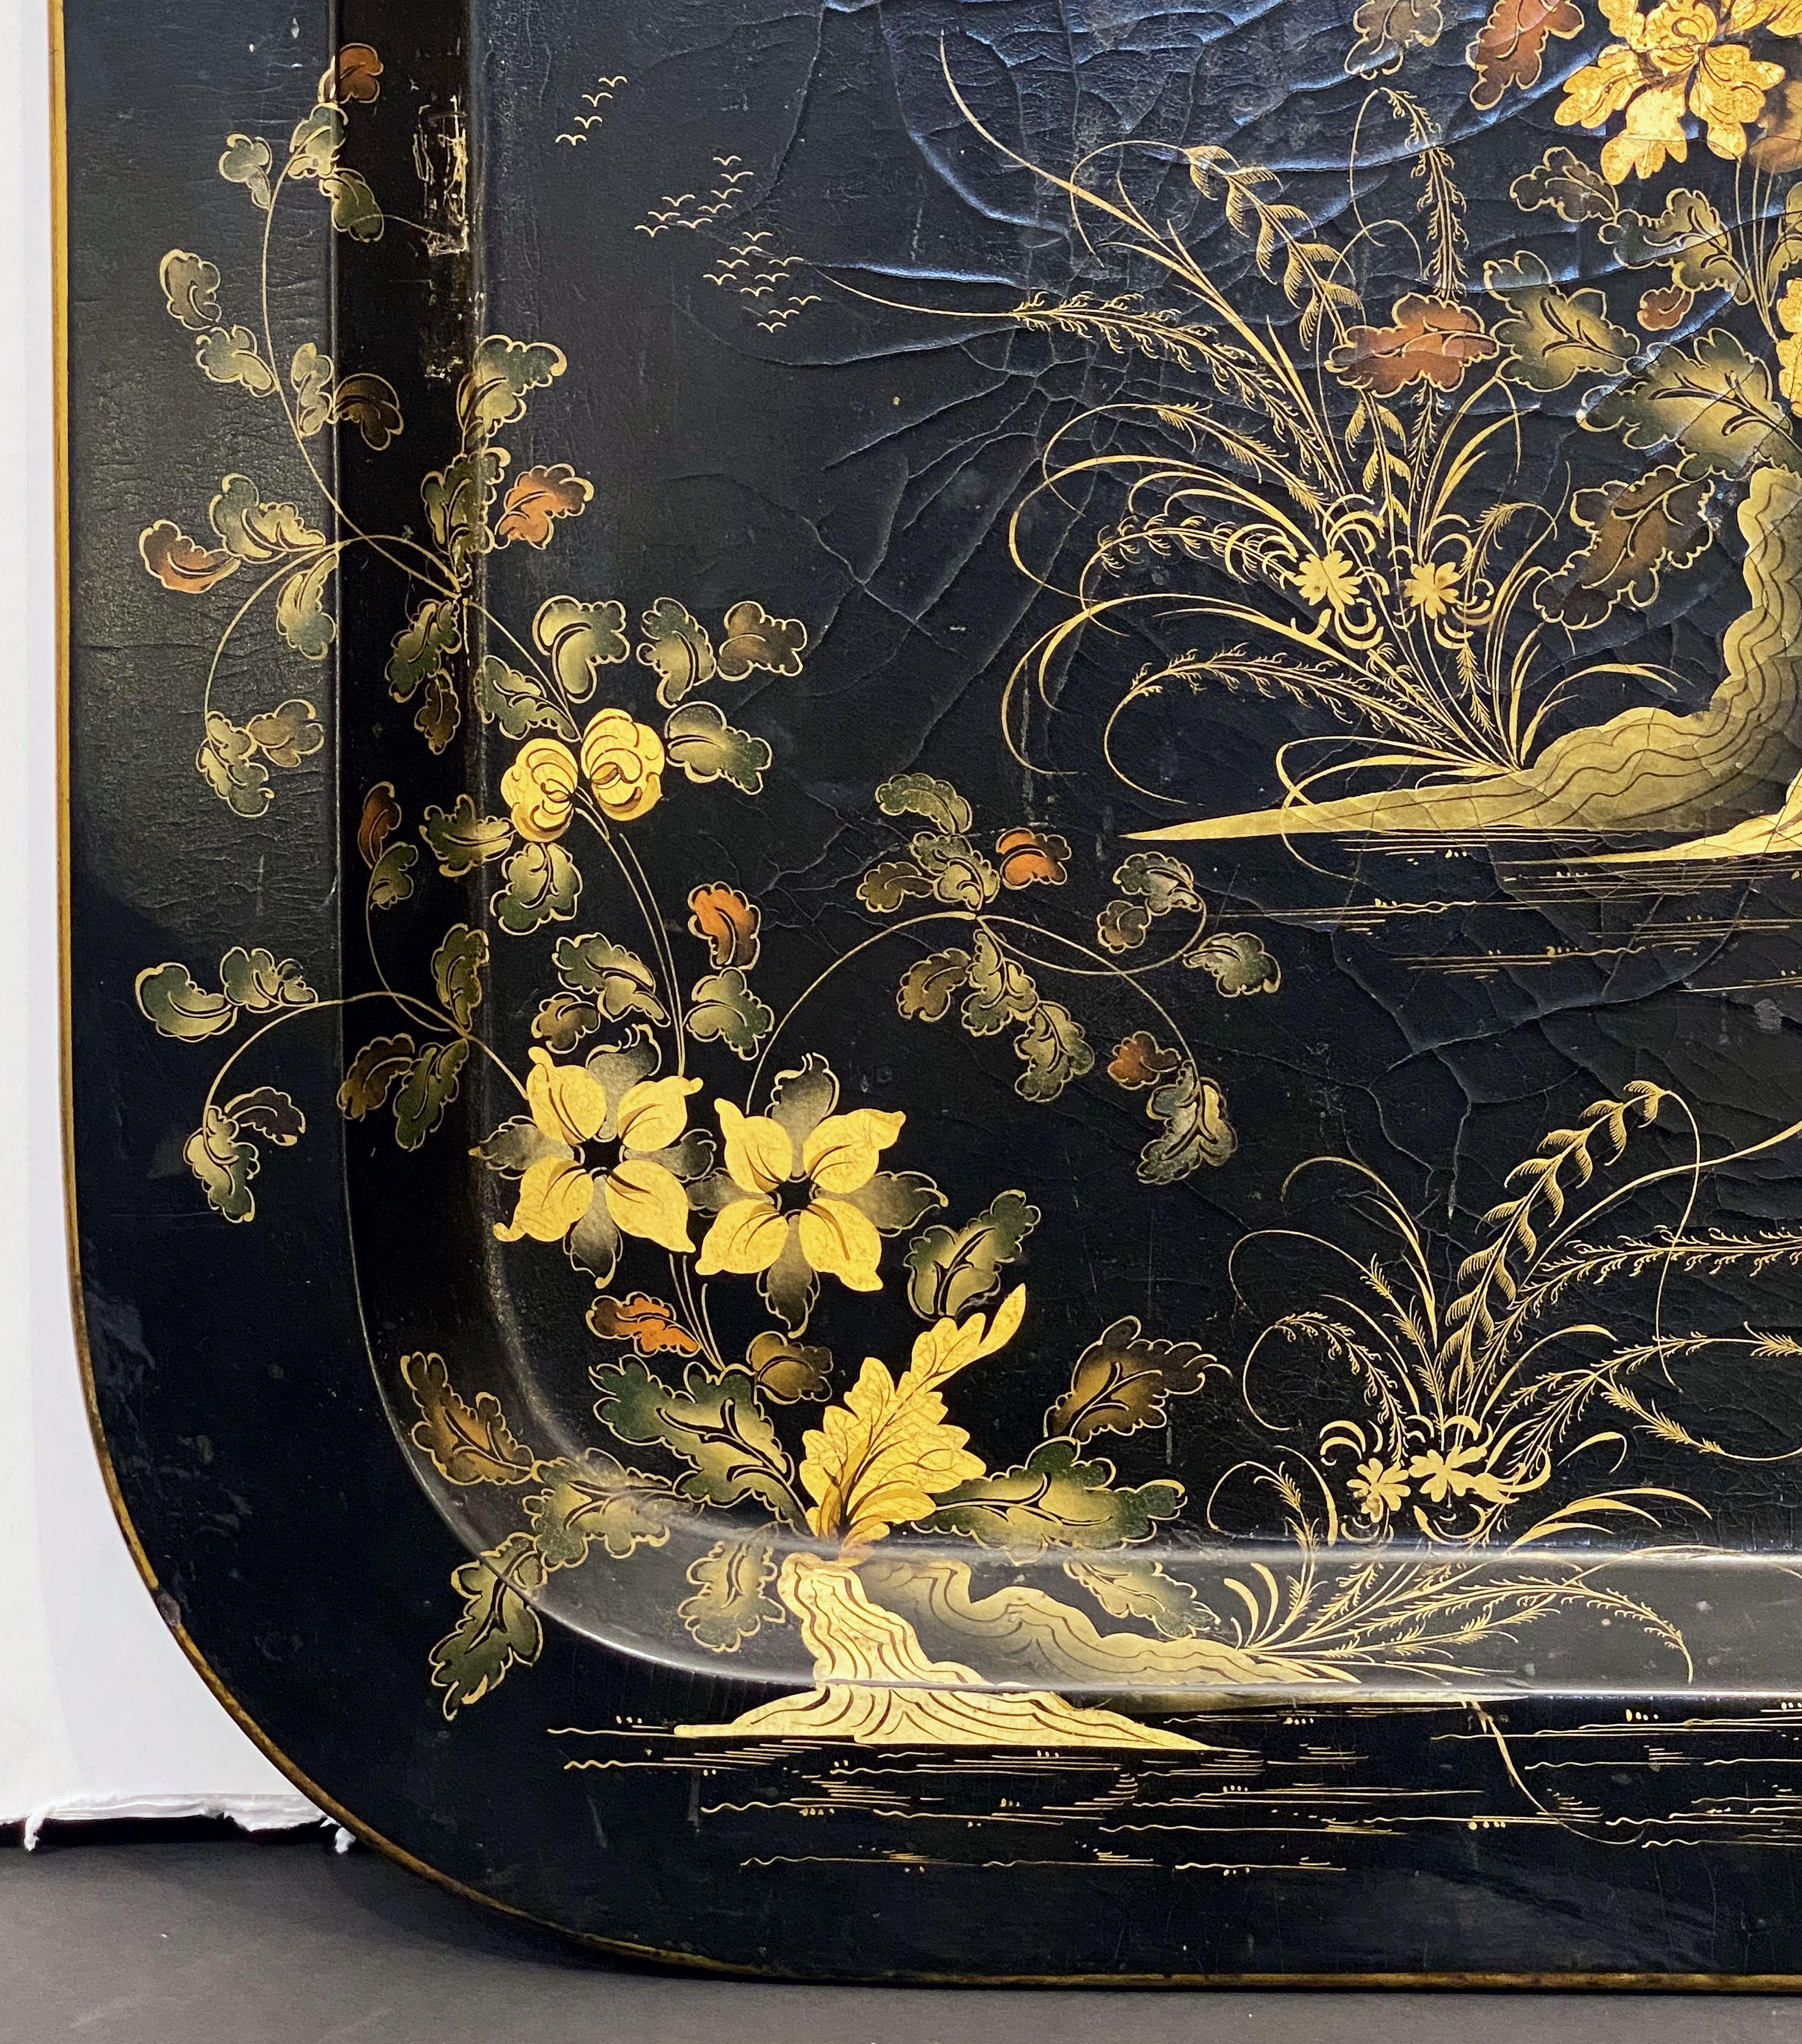 Lacquer Large English Papier-Mâché Chinoiserie Tray (H 23 3/4 x W 30 1/4)